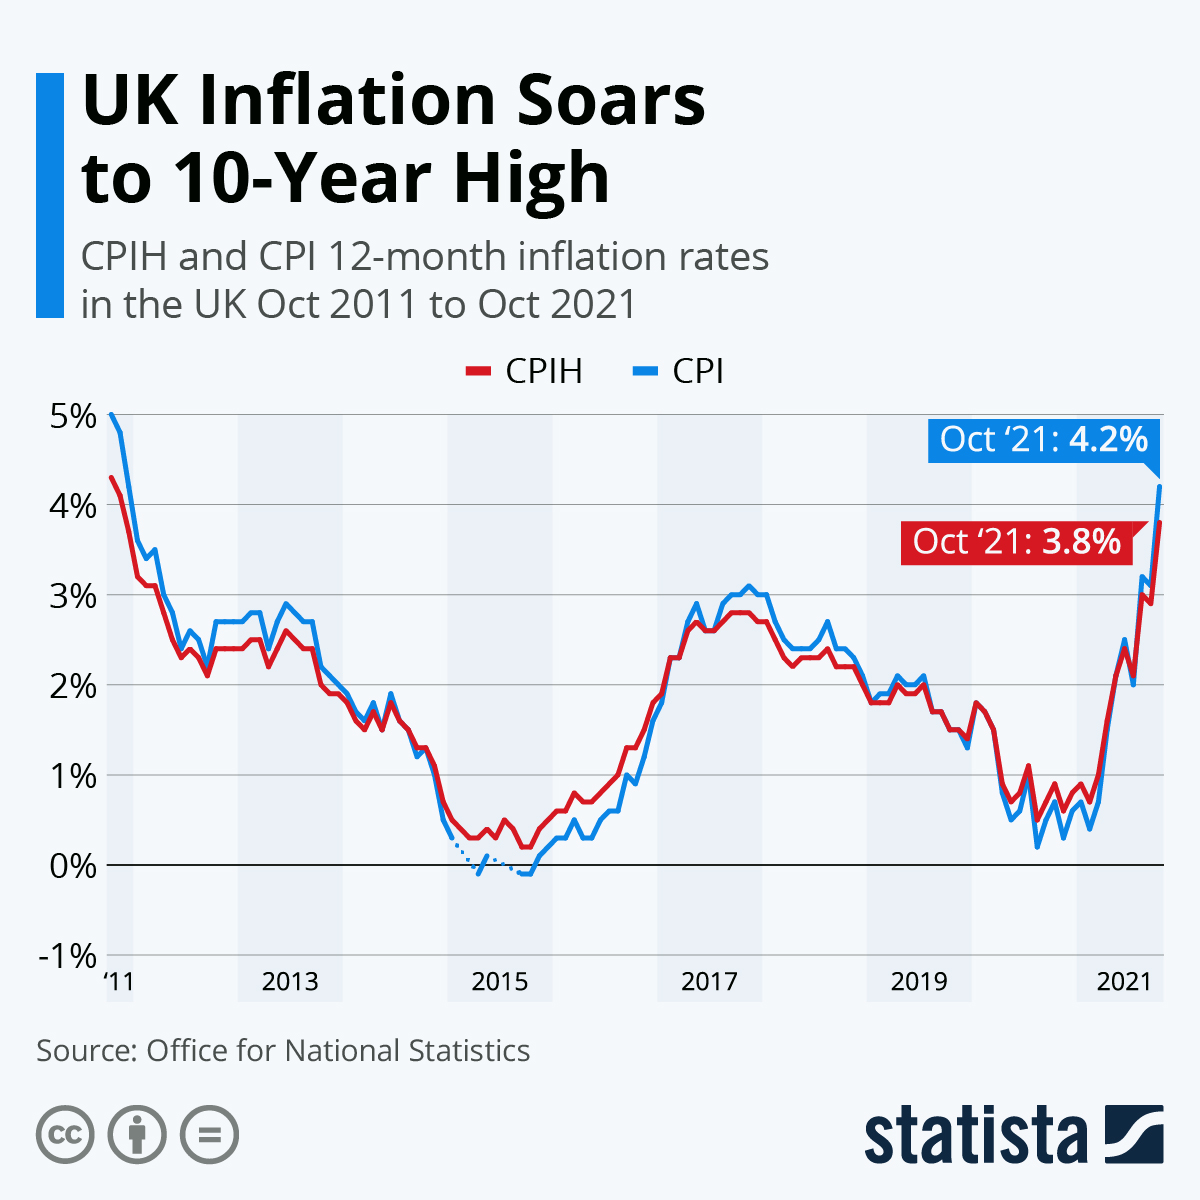 UK Inflation Soars to 10-Year High